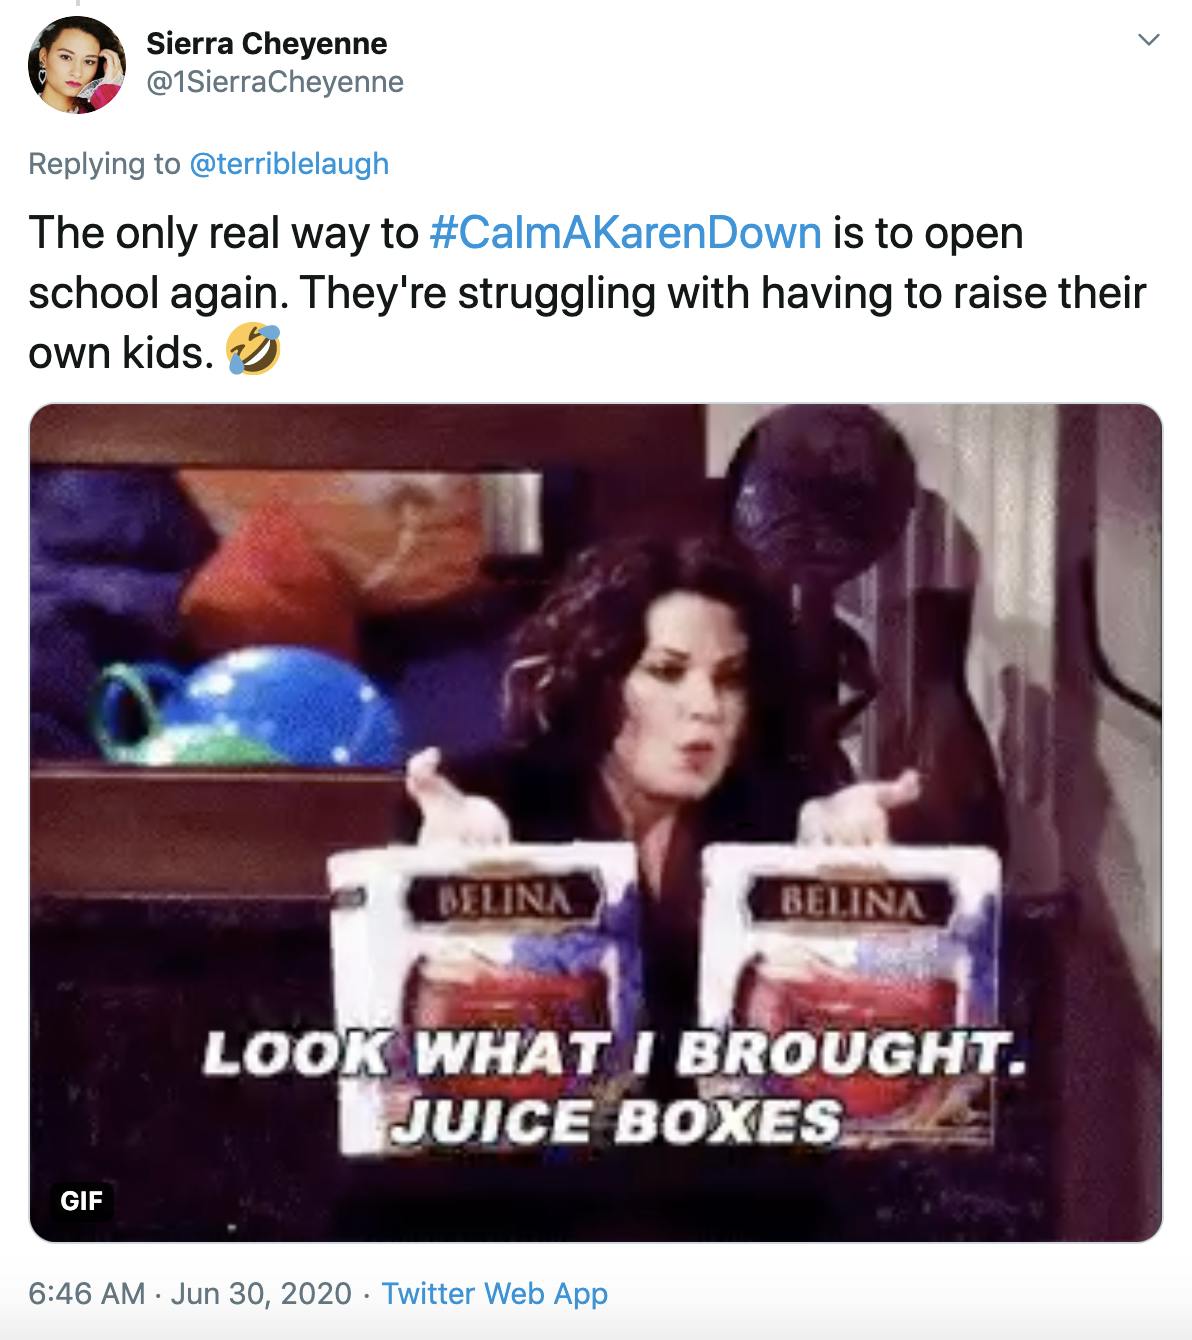 "The only real way to #CalmAKarenDown is to open school again. They're struggling with having to raise their own kids. 🤣" gif of Will and Grace's Karen holding boxed wine and saying "look I brought juice boxes"